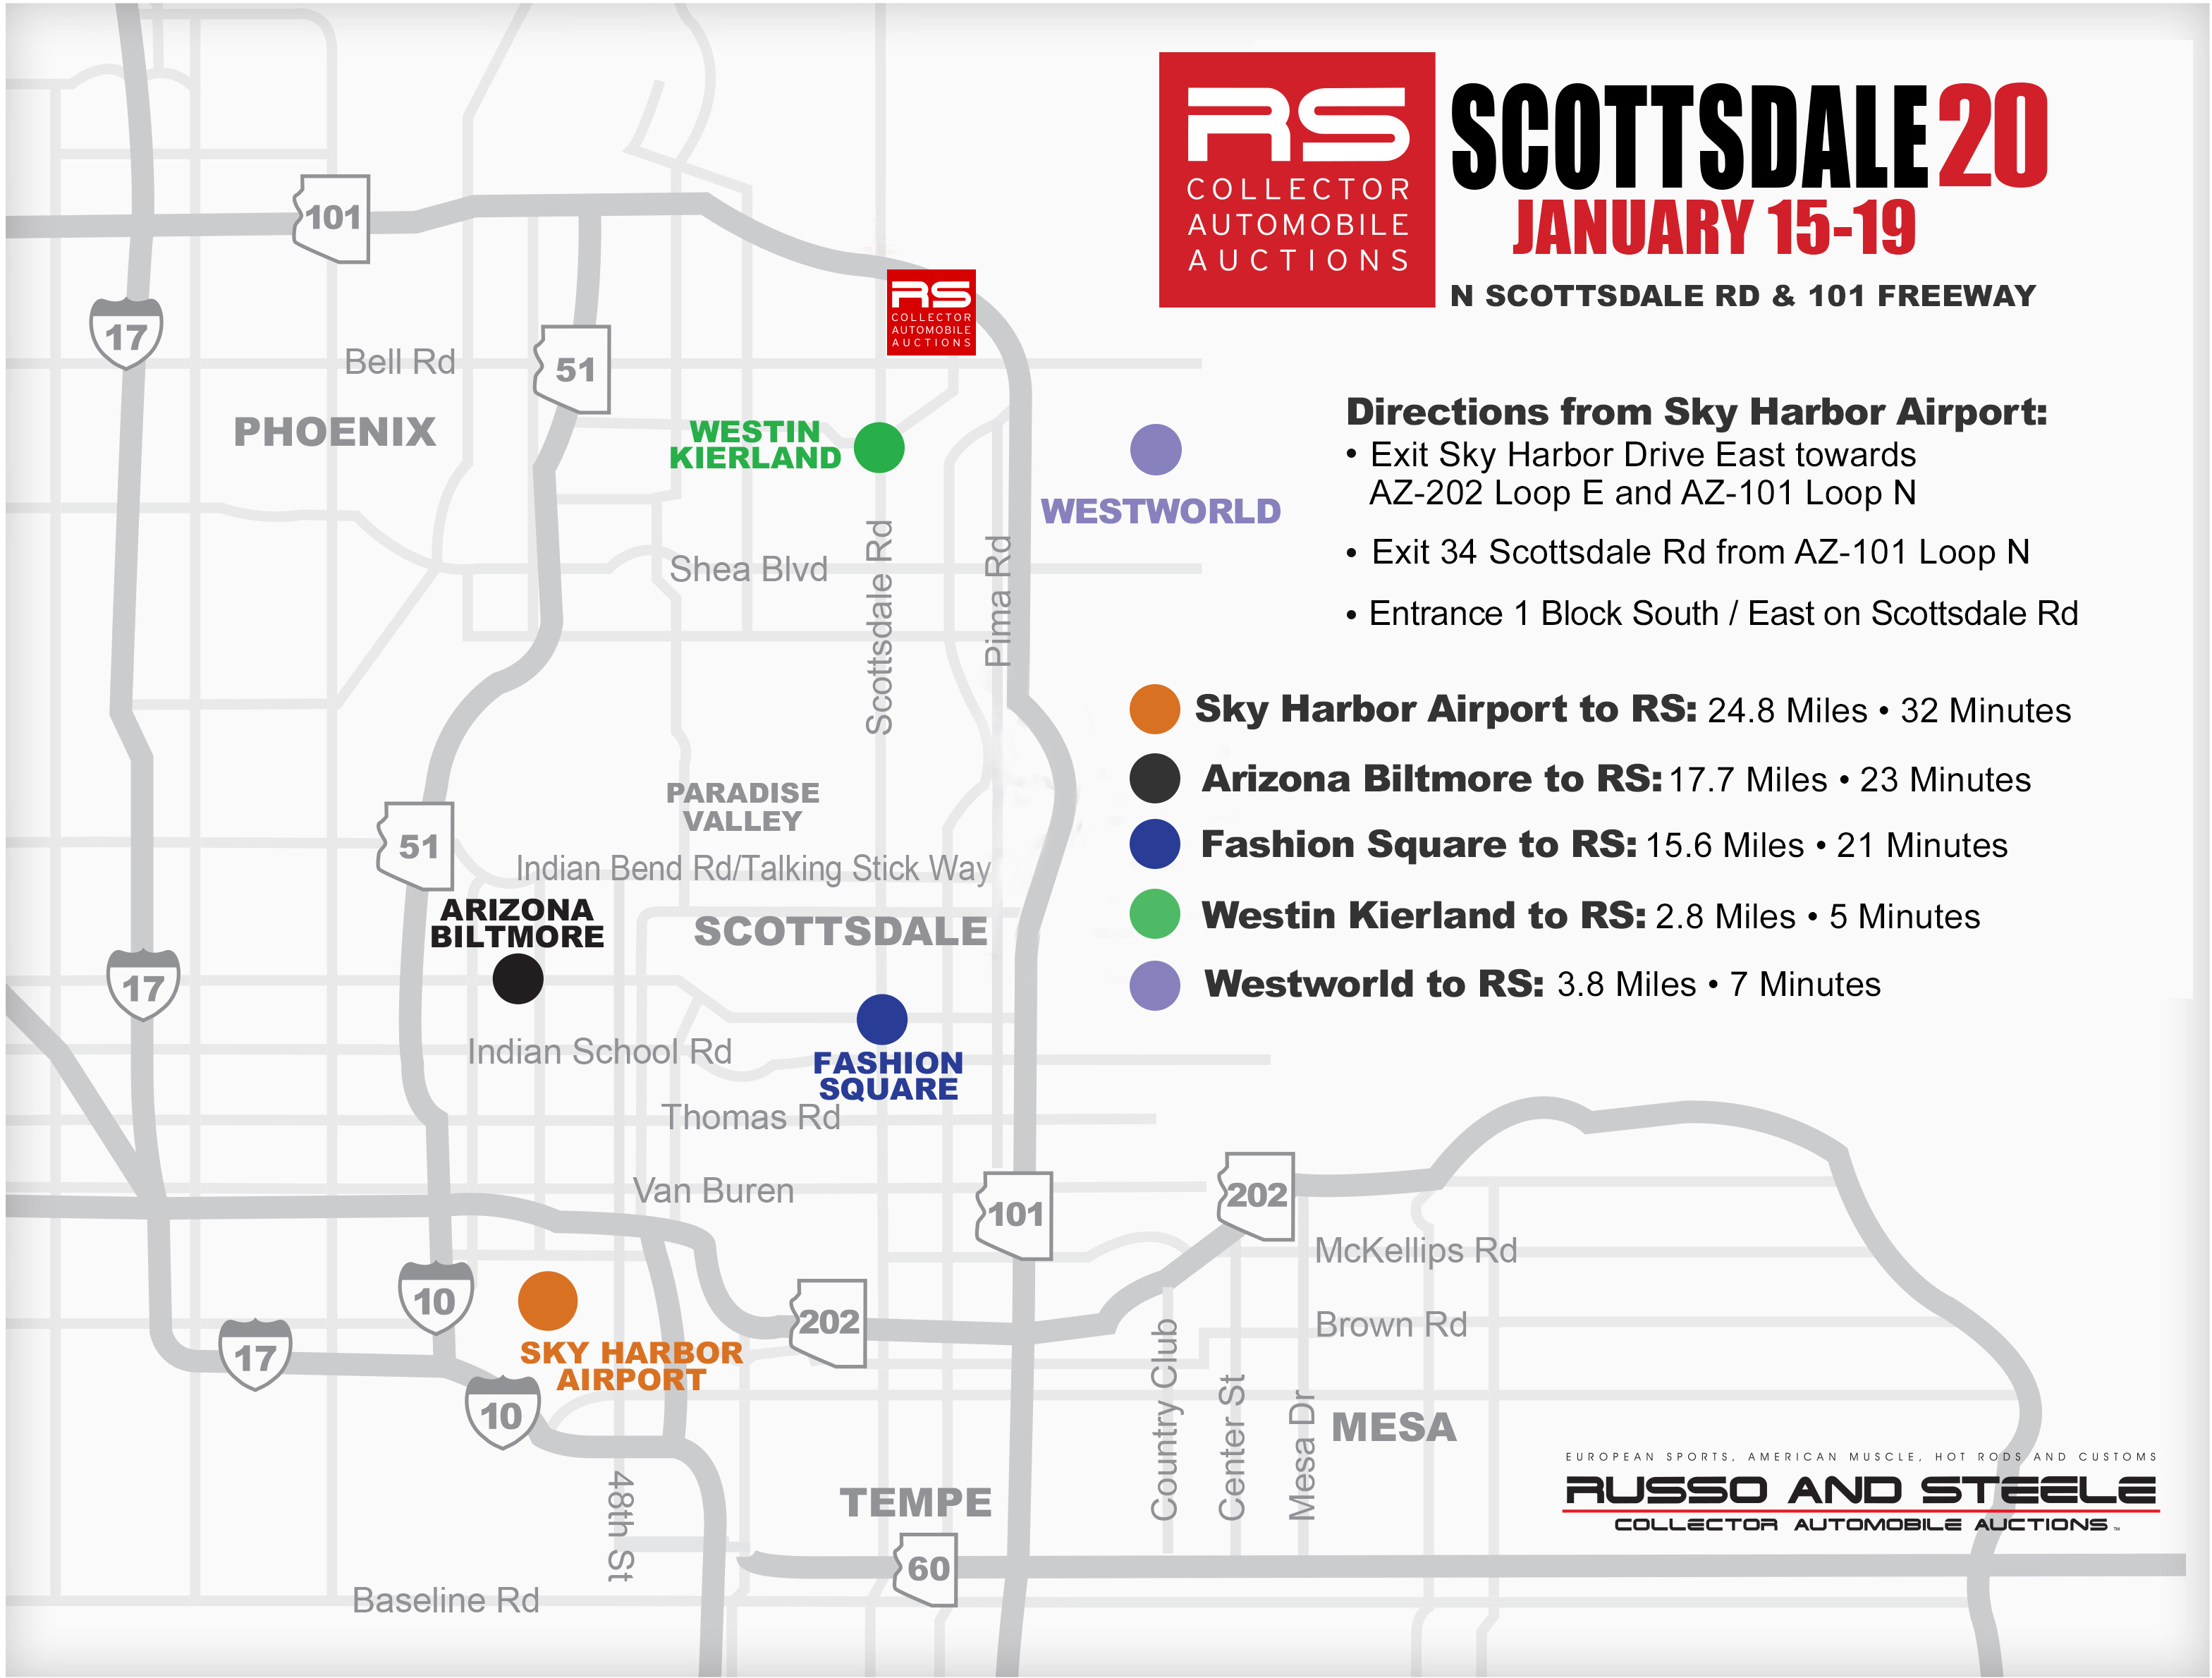 Russo and Steele, Russo and Steele sets ‘homecoming’ for its 20th anniversary Scottsdale sale, ClassicCars.com Journal